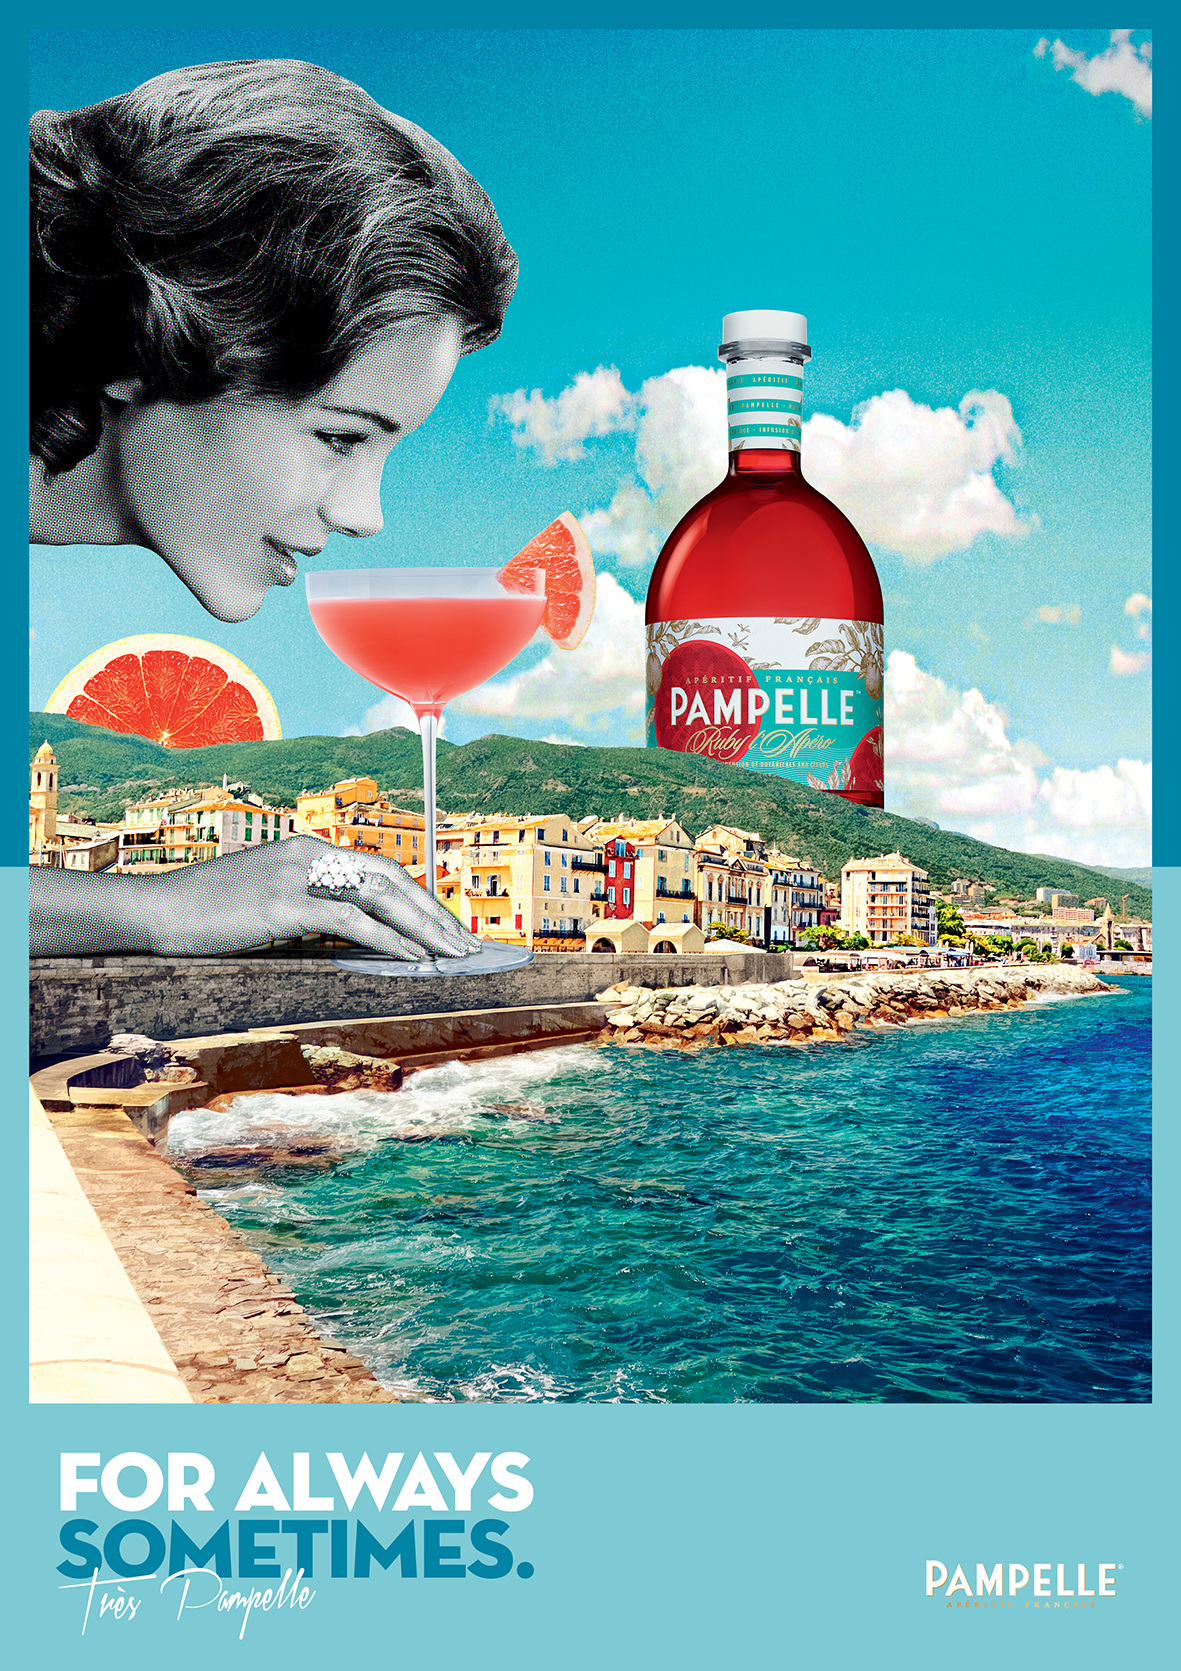 Collage work of cocktail on the beach in the south of france by Electric art for Pampelle